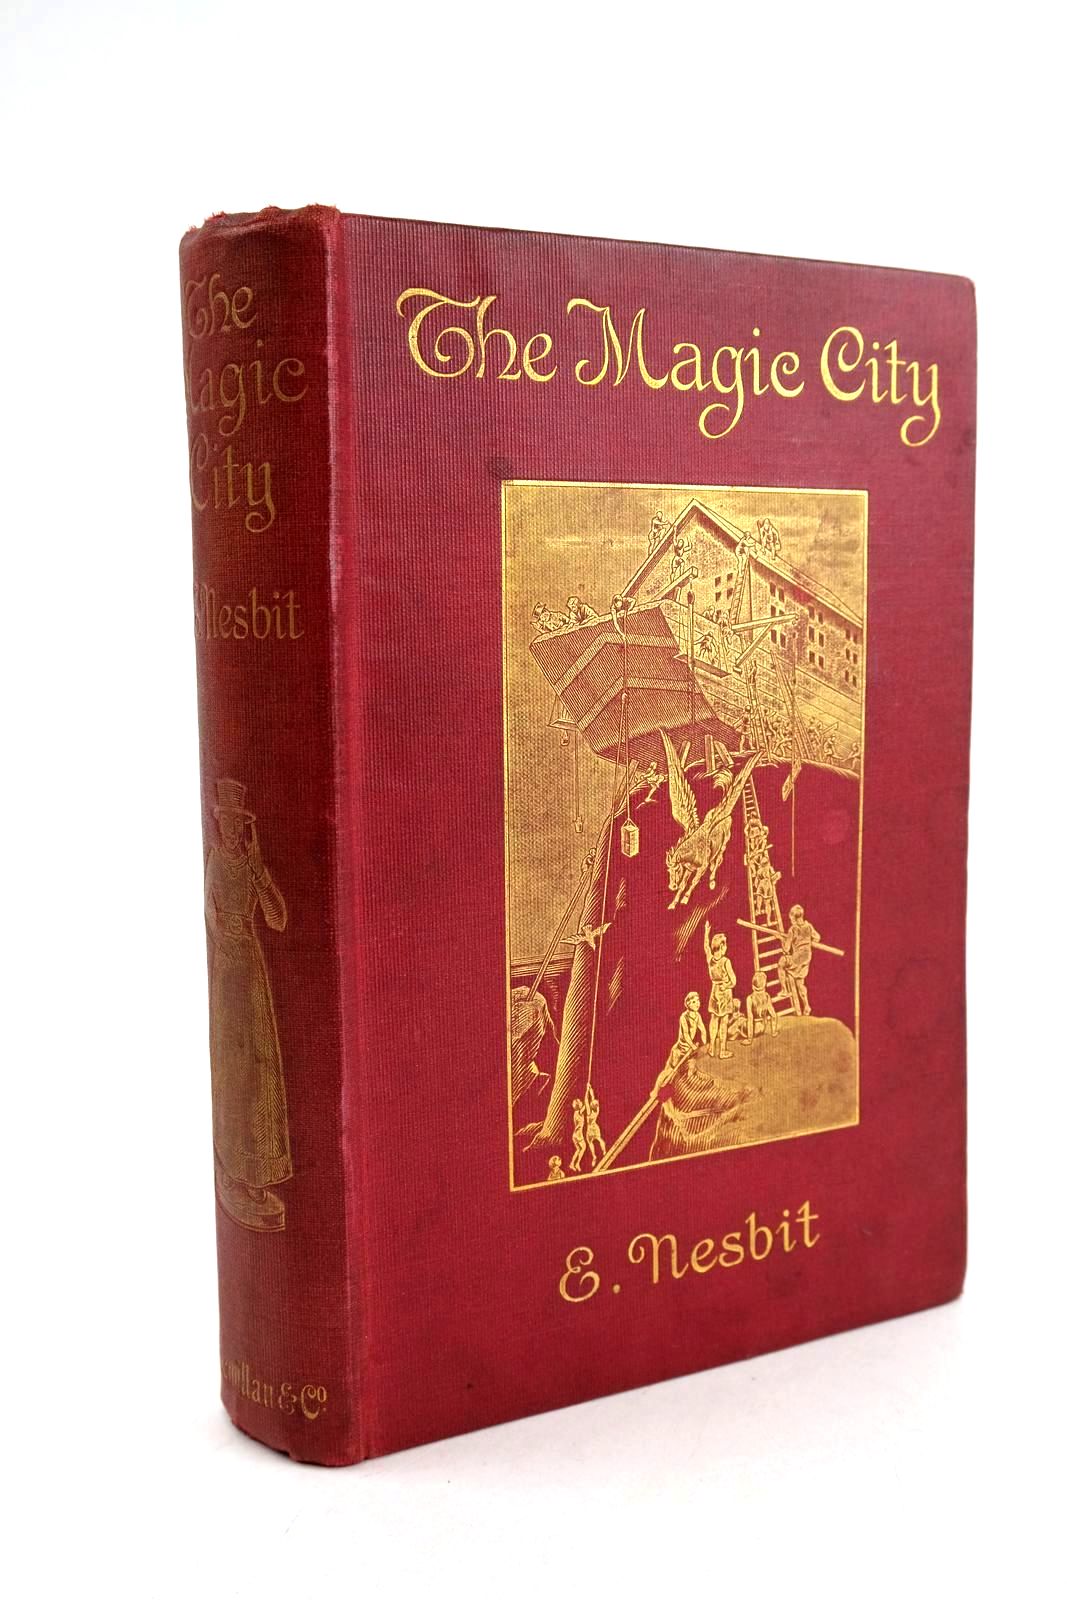 Photo of THE MAGIC CITY written by Nesbit, E. illustrated by Millar, H.R. published by Macmillan &amp; Co. Ltd. (STOCK CODE: 1324392)  for sale by Stella & Rose's Books